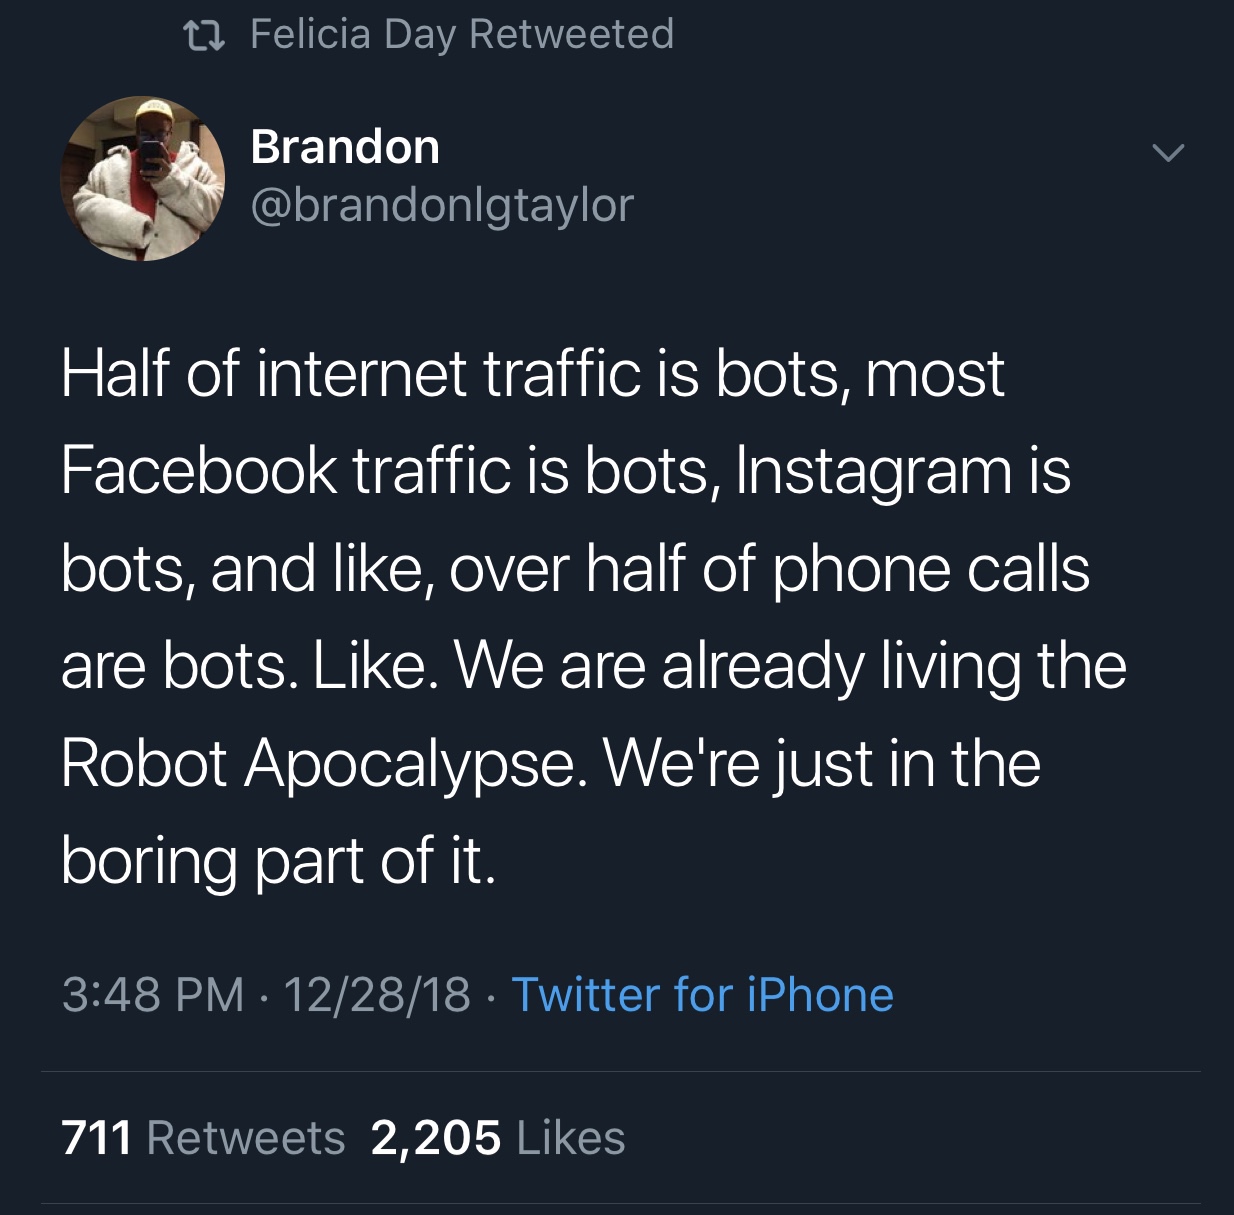 atmosphere - 22 Felicia Day Retweeted Brandon Half of internet traffic is bots, most Facebook traffic is bots, Instagram is bots, and , over half of phone calls are bots. . We are already living the Robot Apocalypse. We're just in the boring part of it. 1